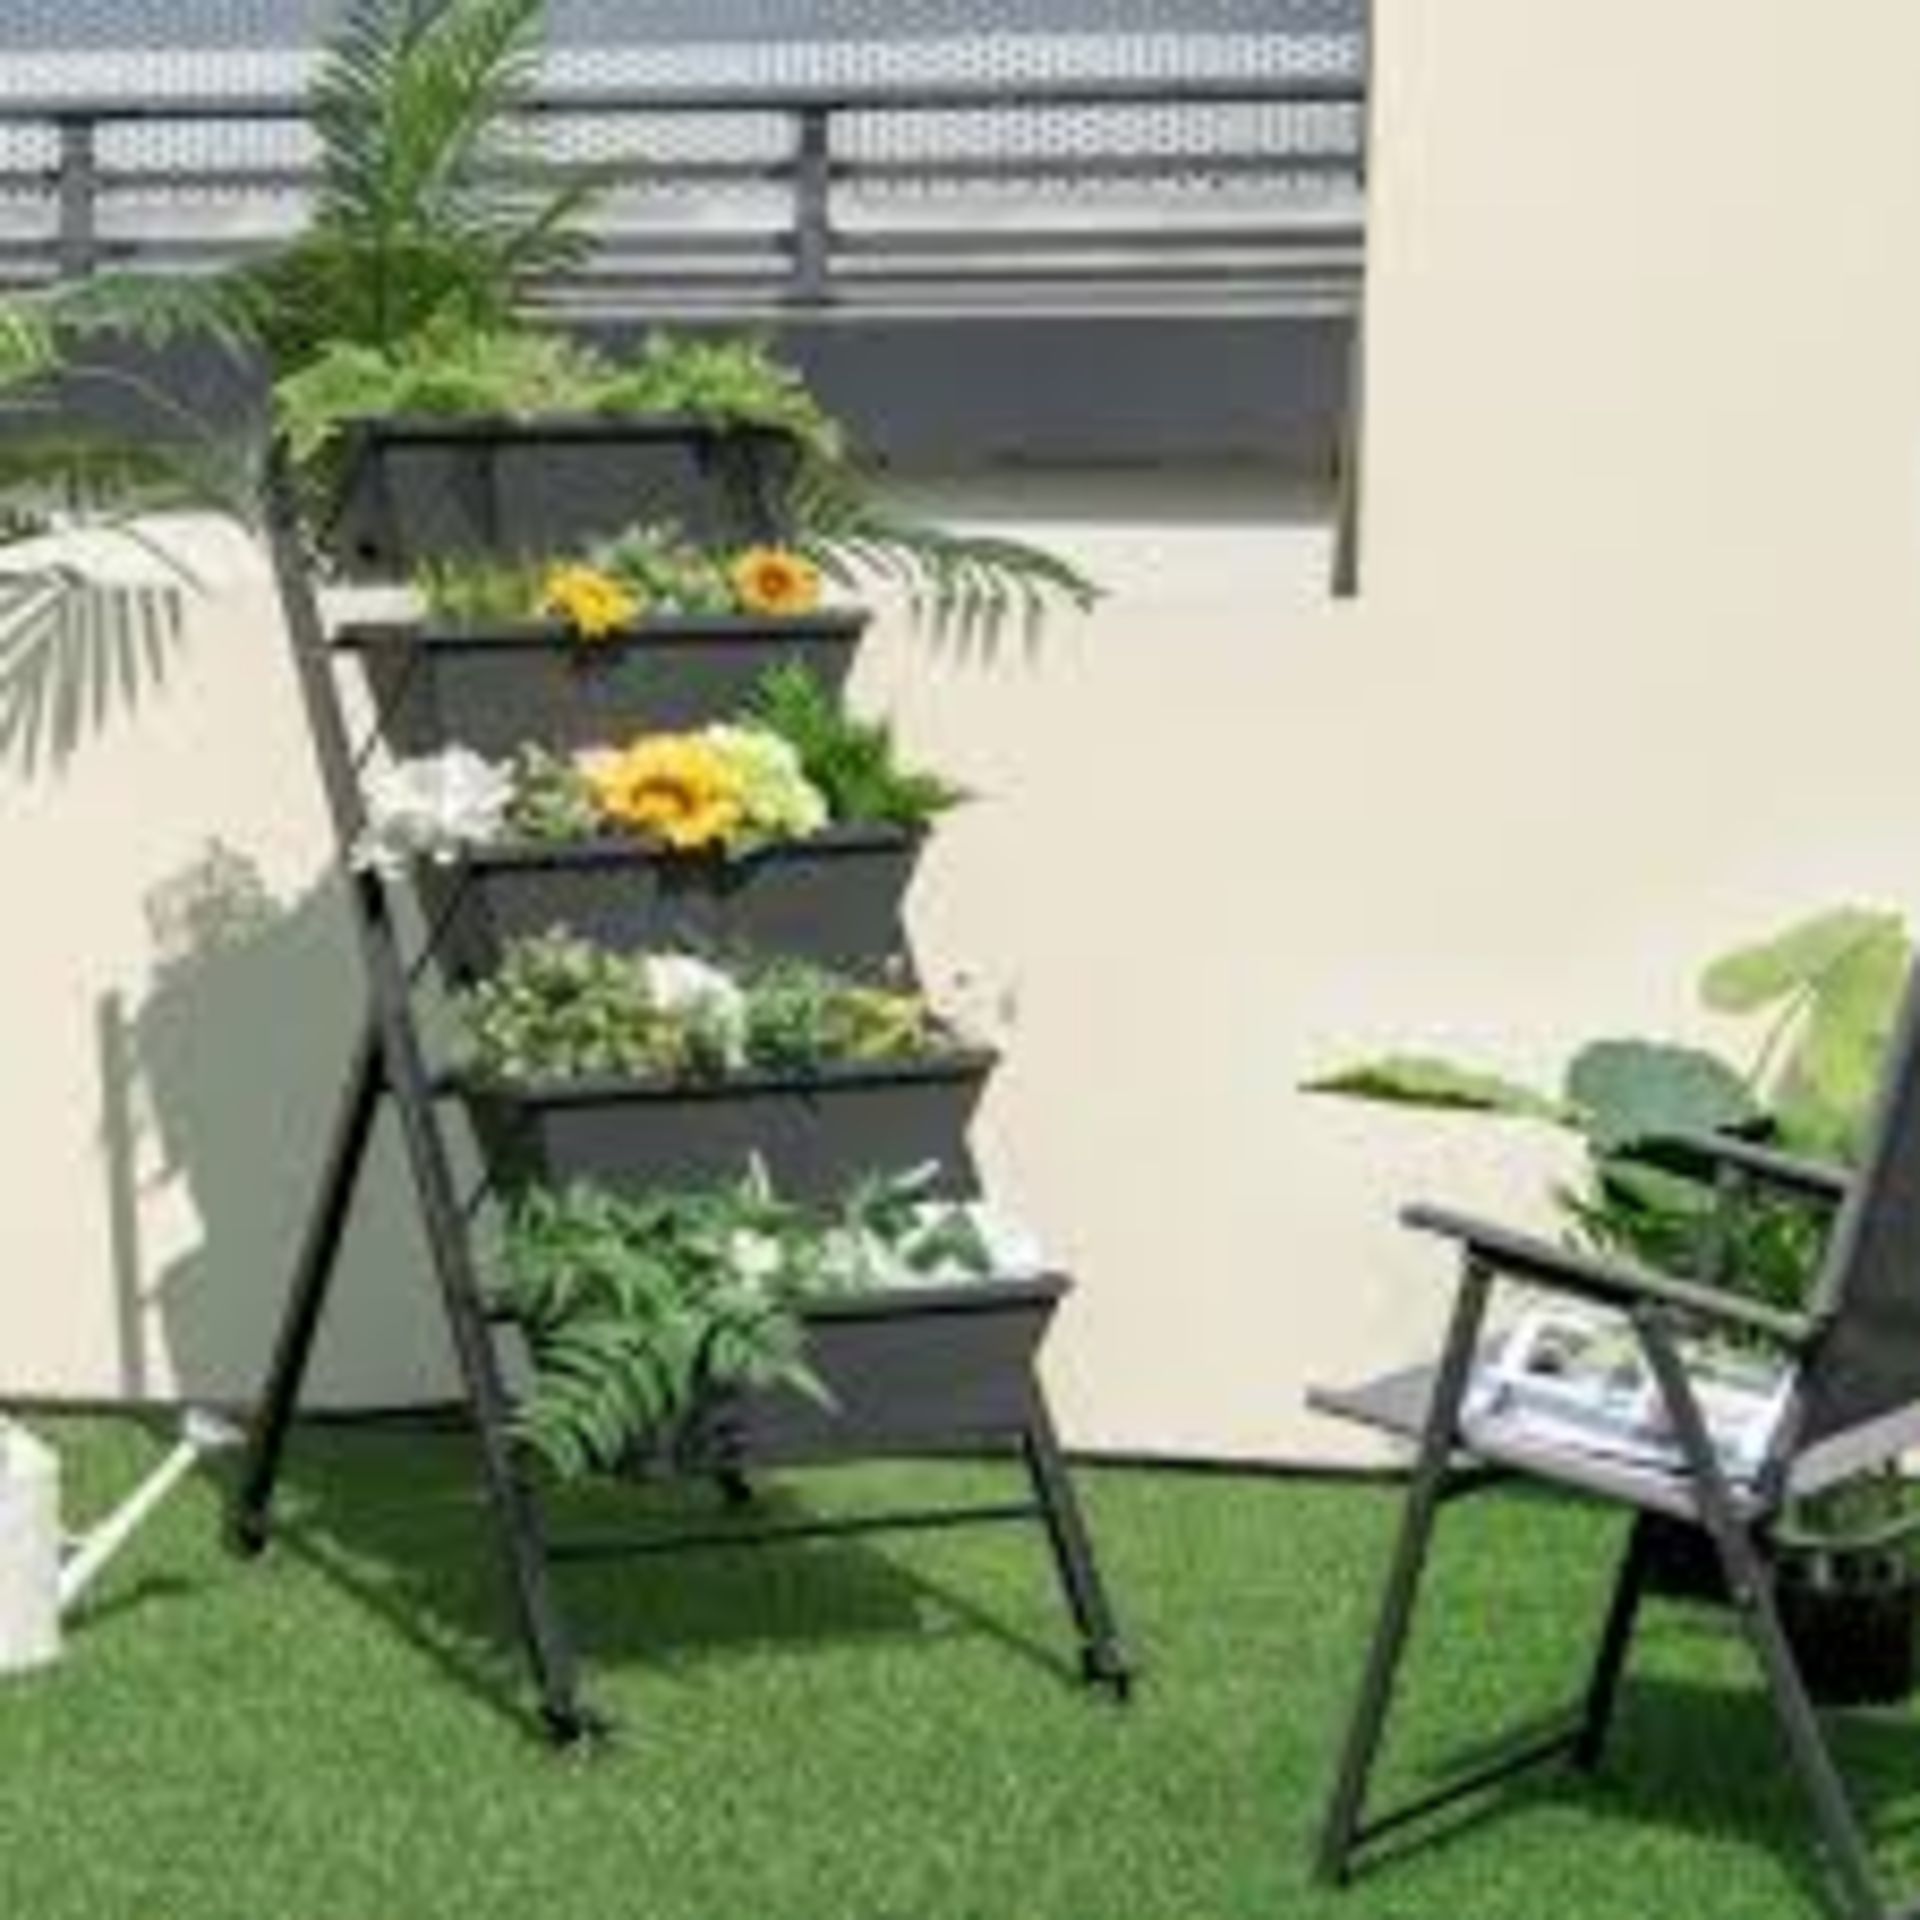 NP10948 5-Tier Vertical Raised Garden Bed With Wheels . - R14.12.